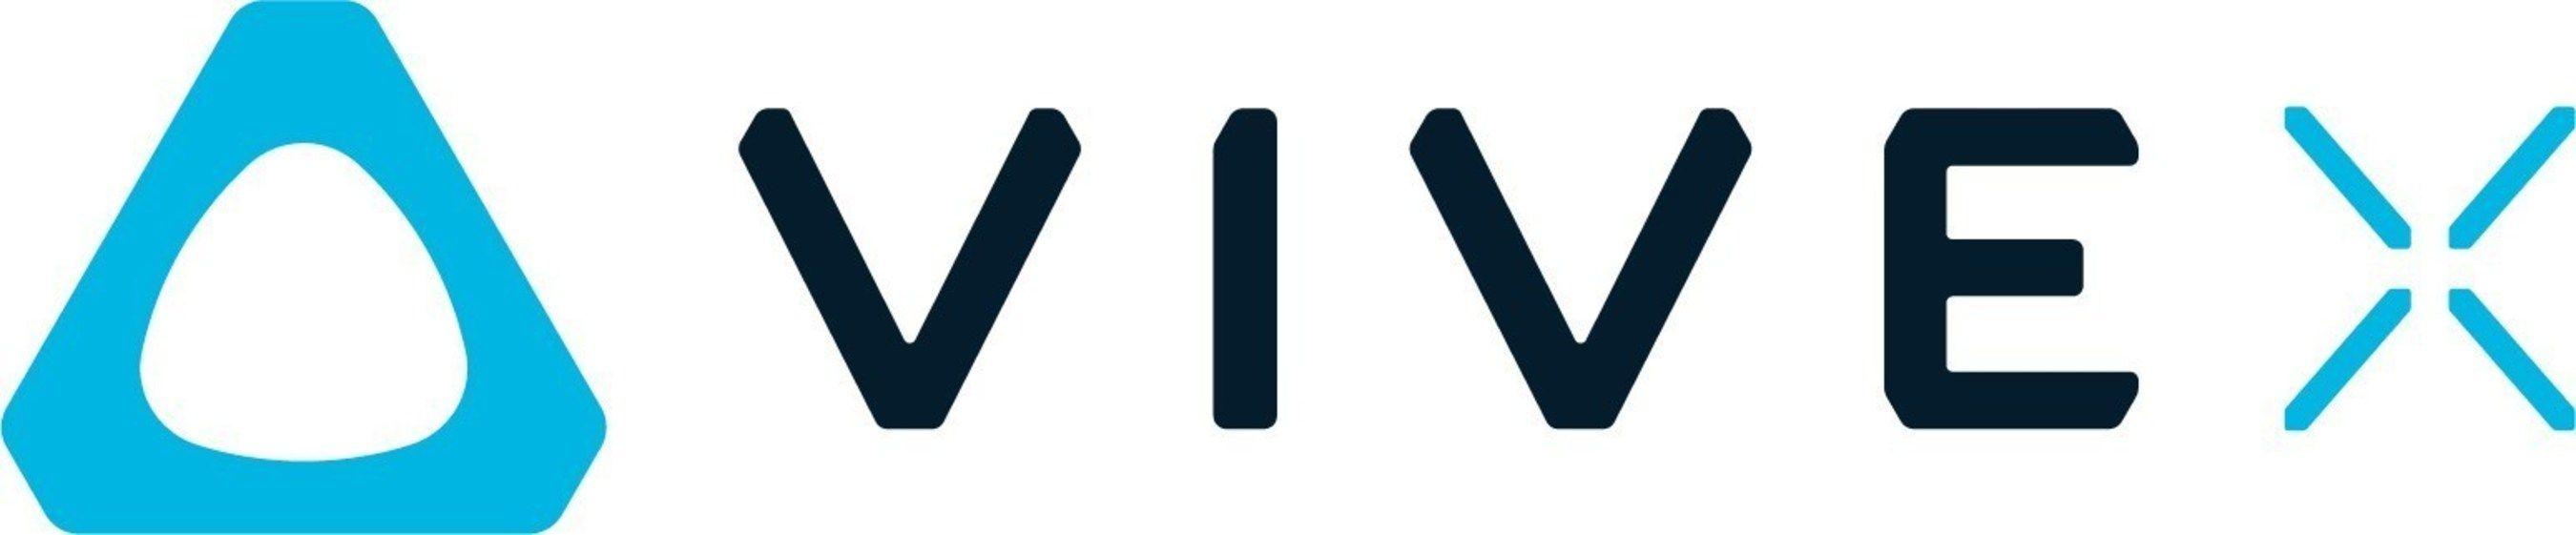 Vive HTC Logo - HTC's VIVE X Accelerator for Virtual Reality Start-Ups Opens Call ...